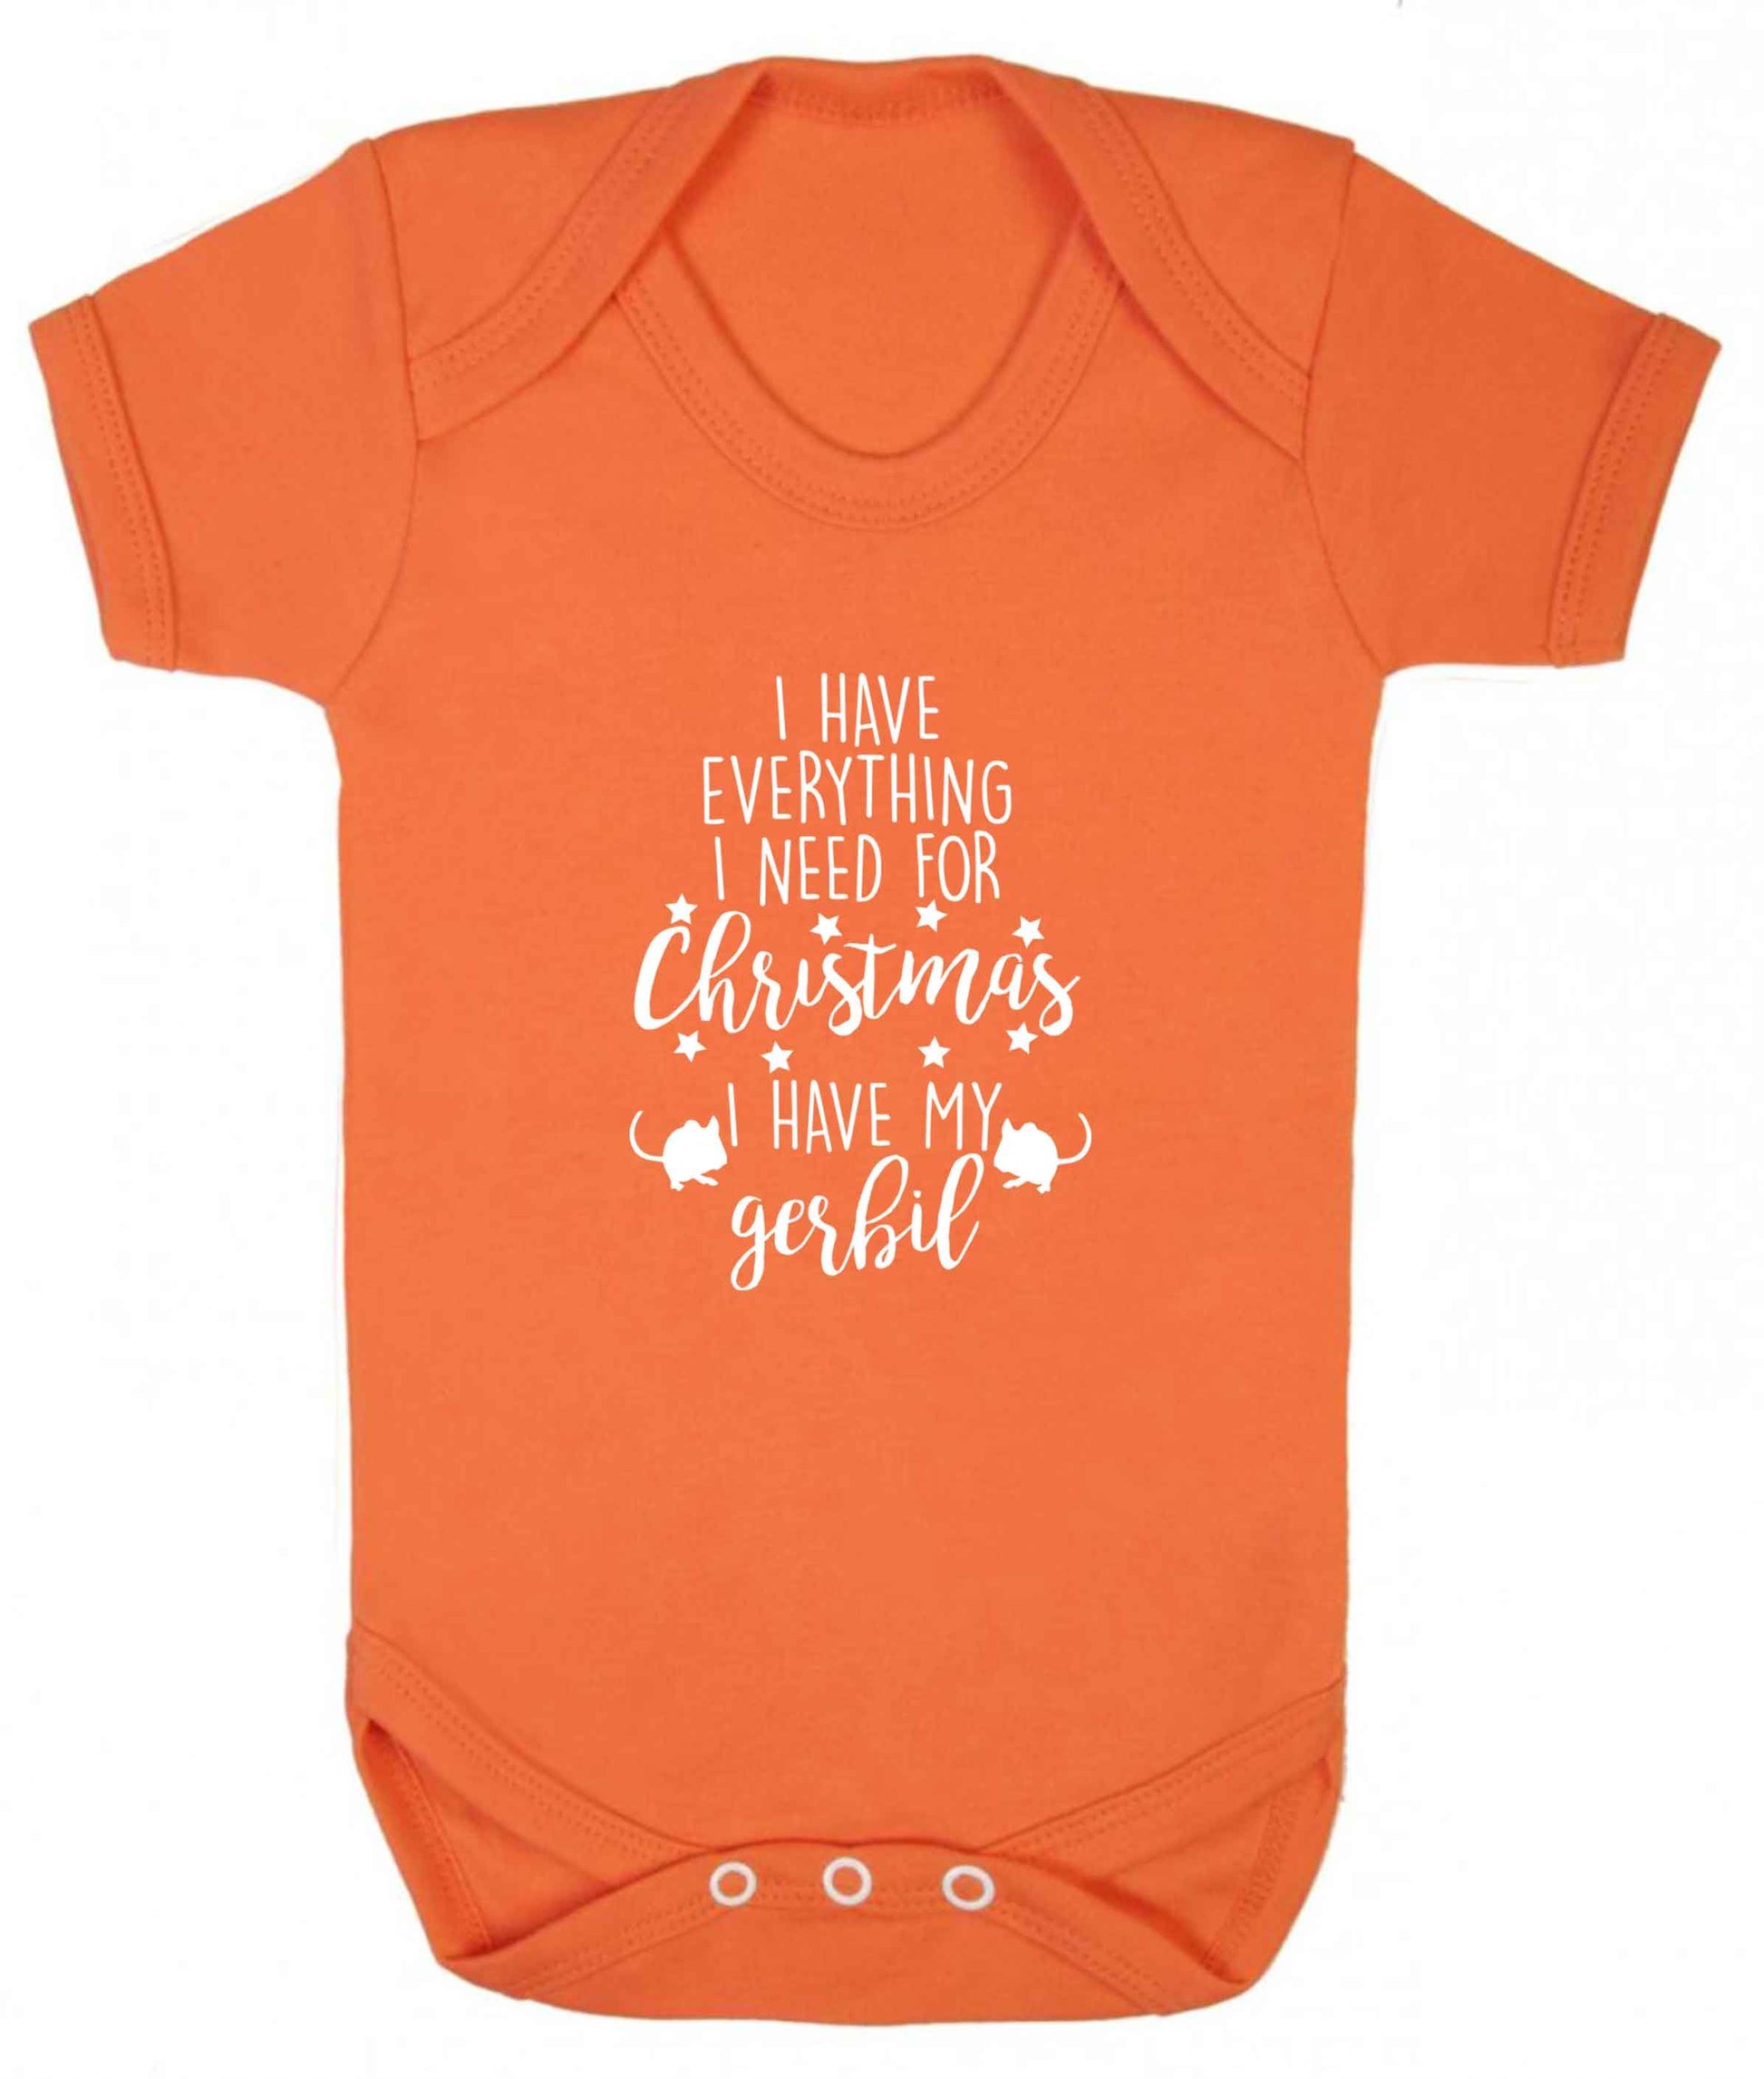 I have everything I need for Christmas I have my gerbil baby vest orange 18-24 months